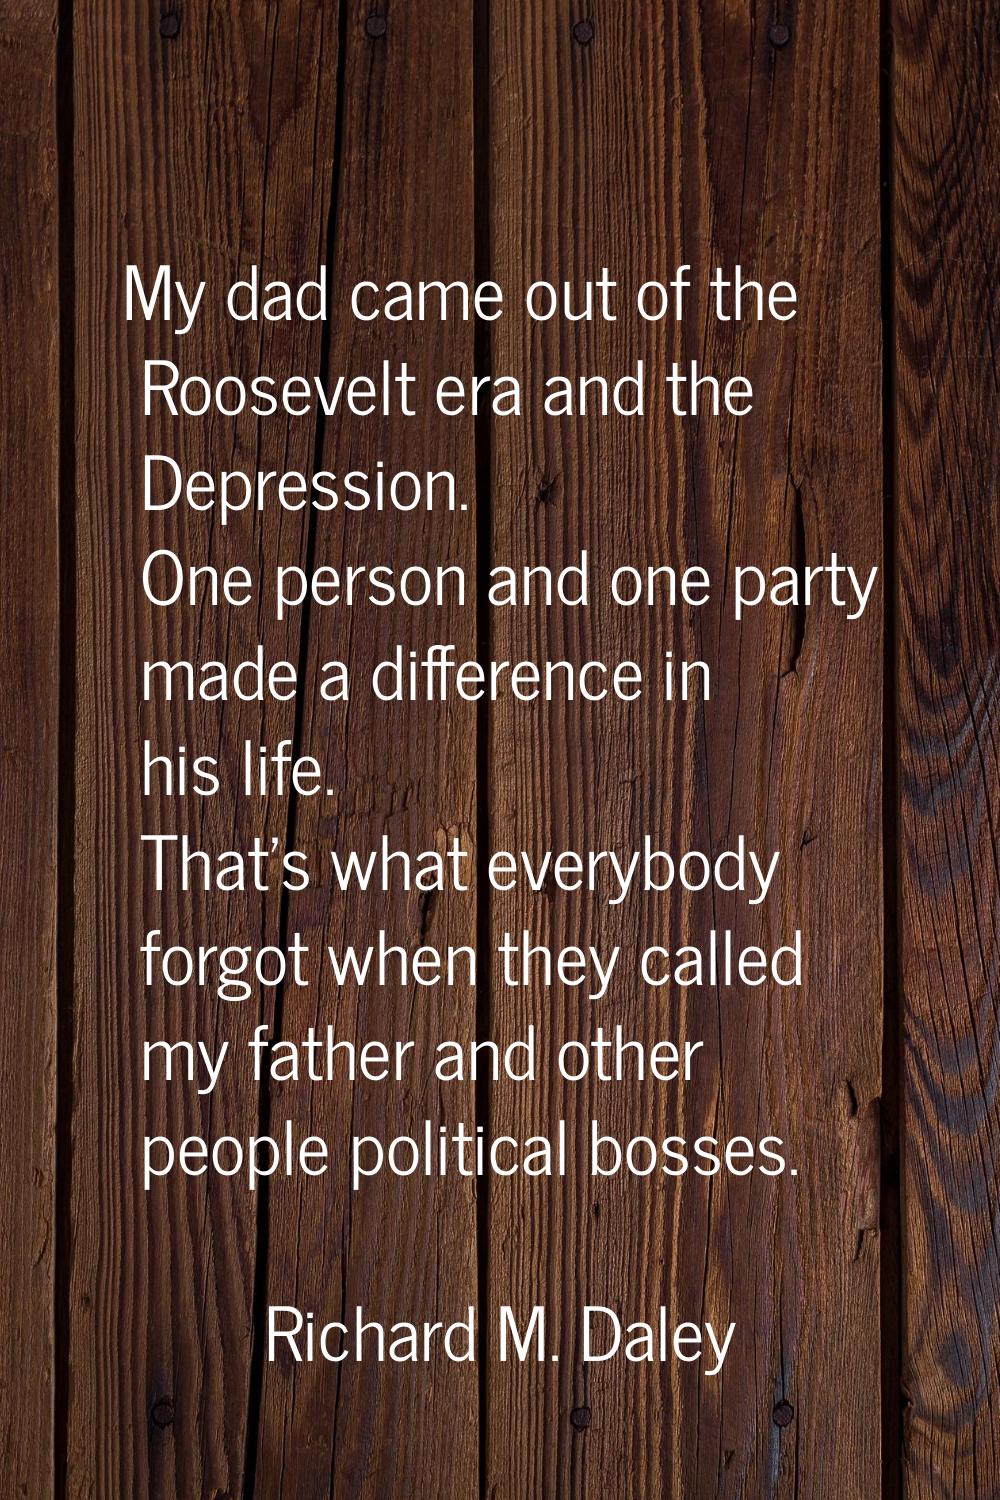 My dad came out of the Roosevelt era and the Depression. One person and one party made a difference